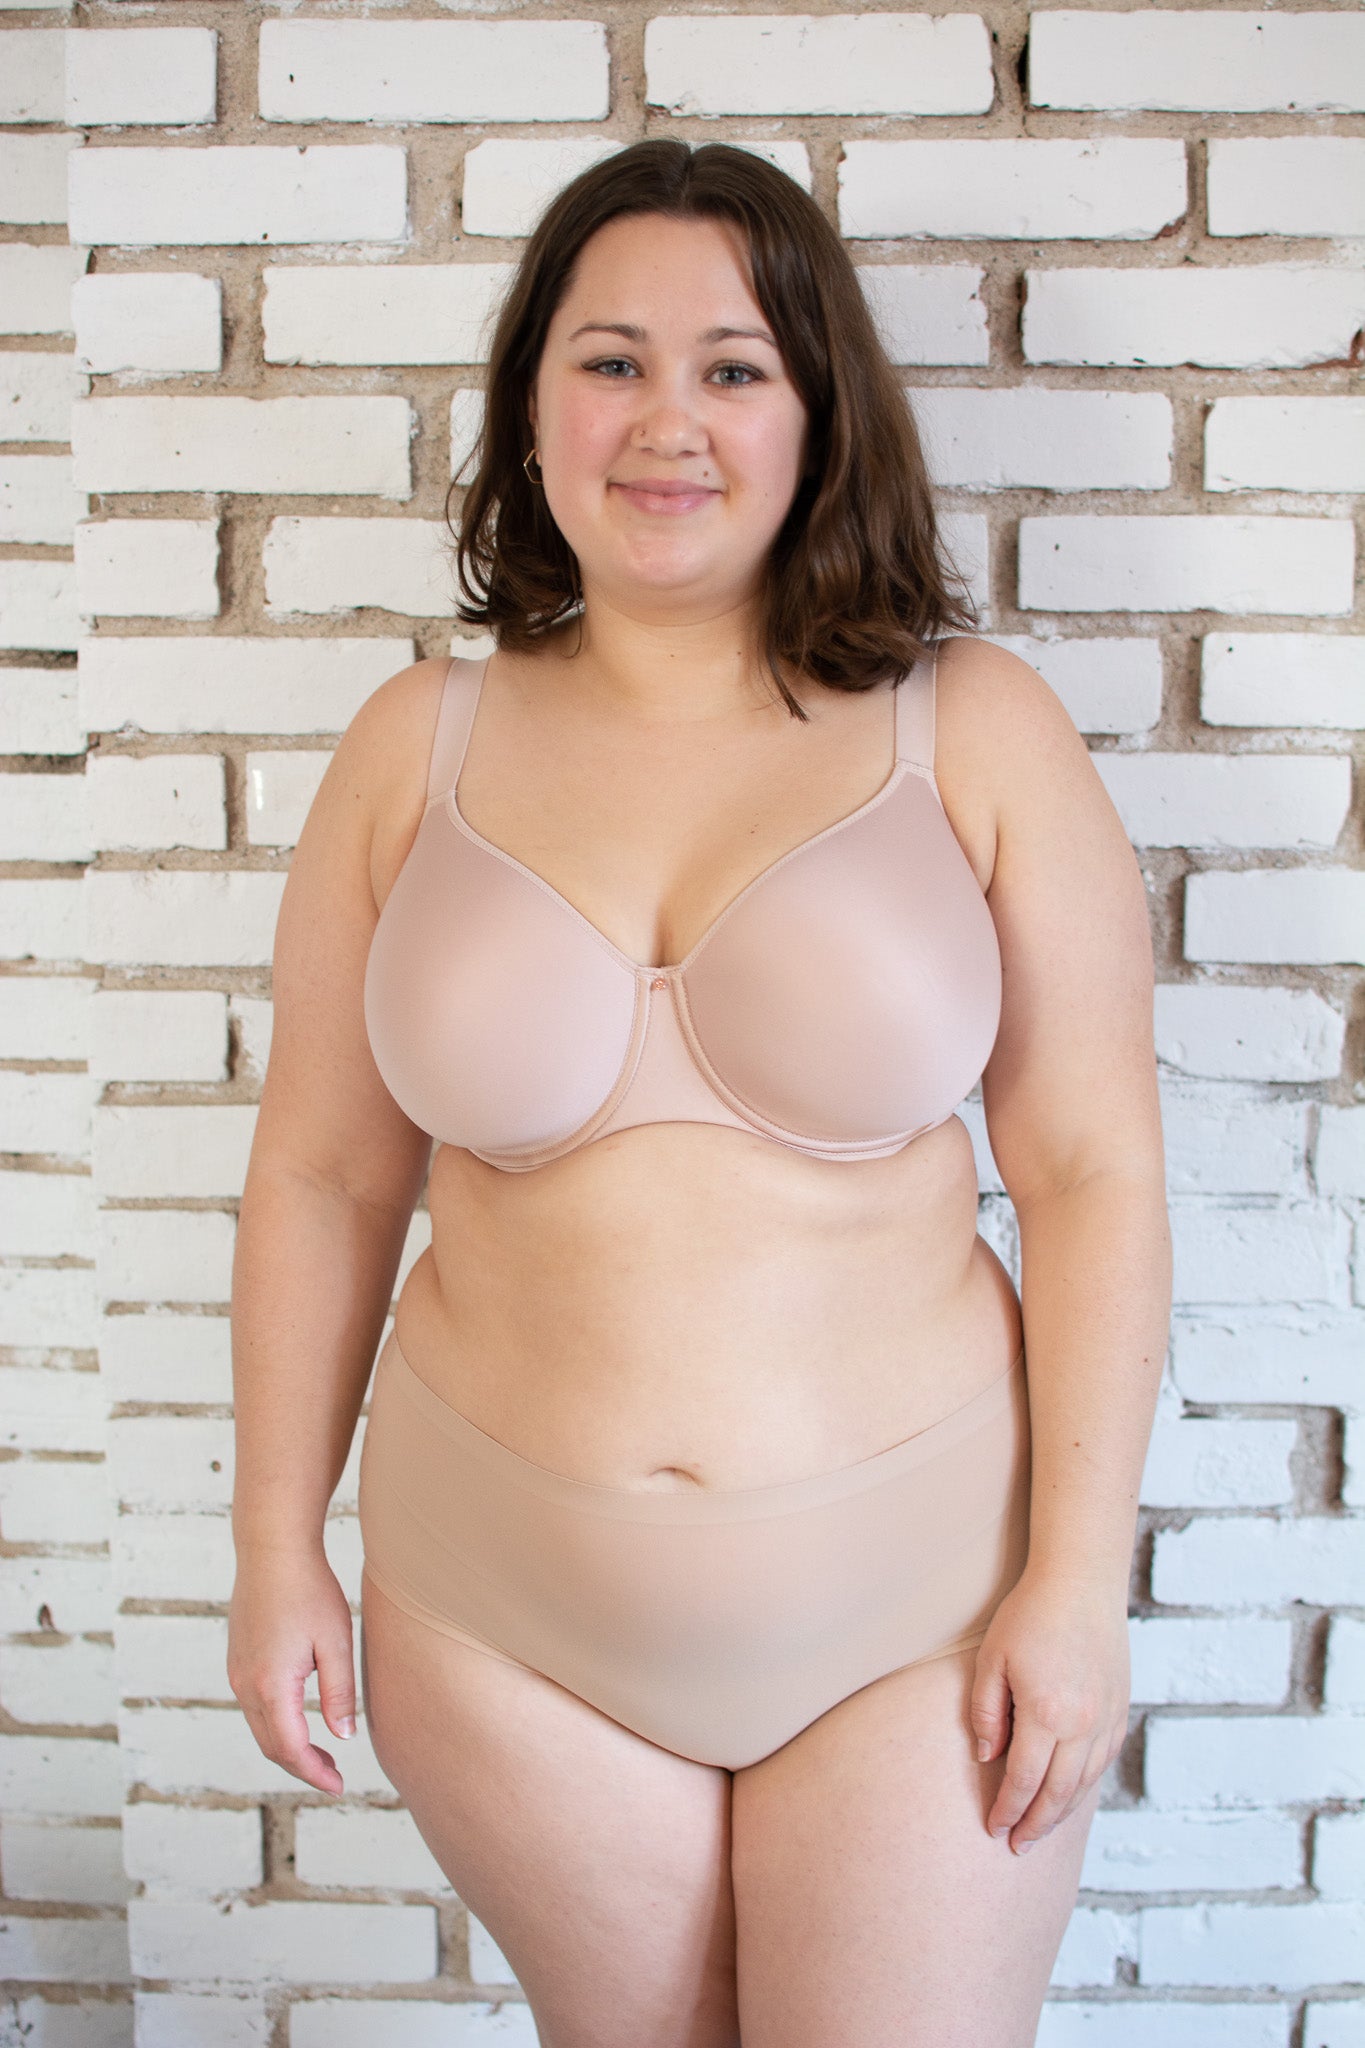 Load image into Gallery viewer, Chantelle Comfort Chic Full Coverage Memory Foam Bra
